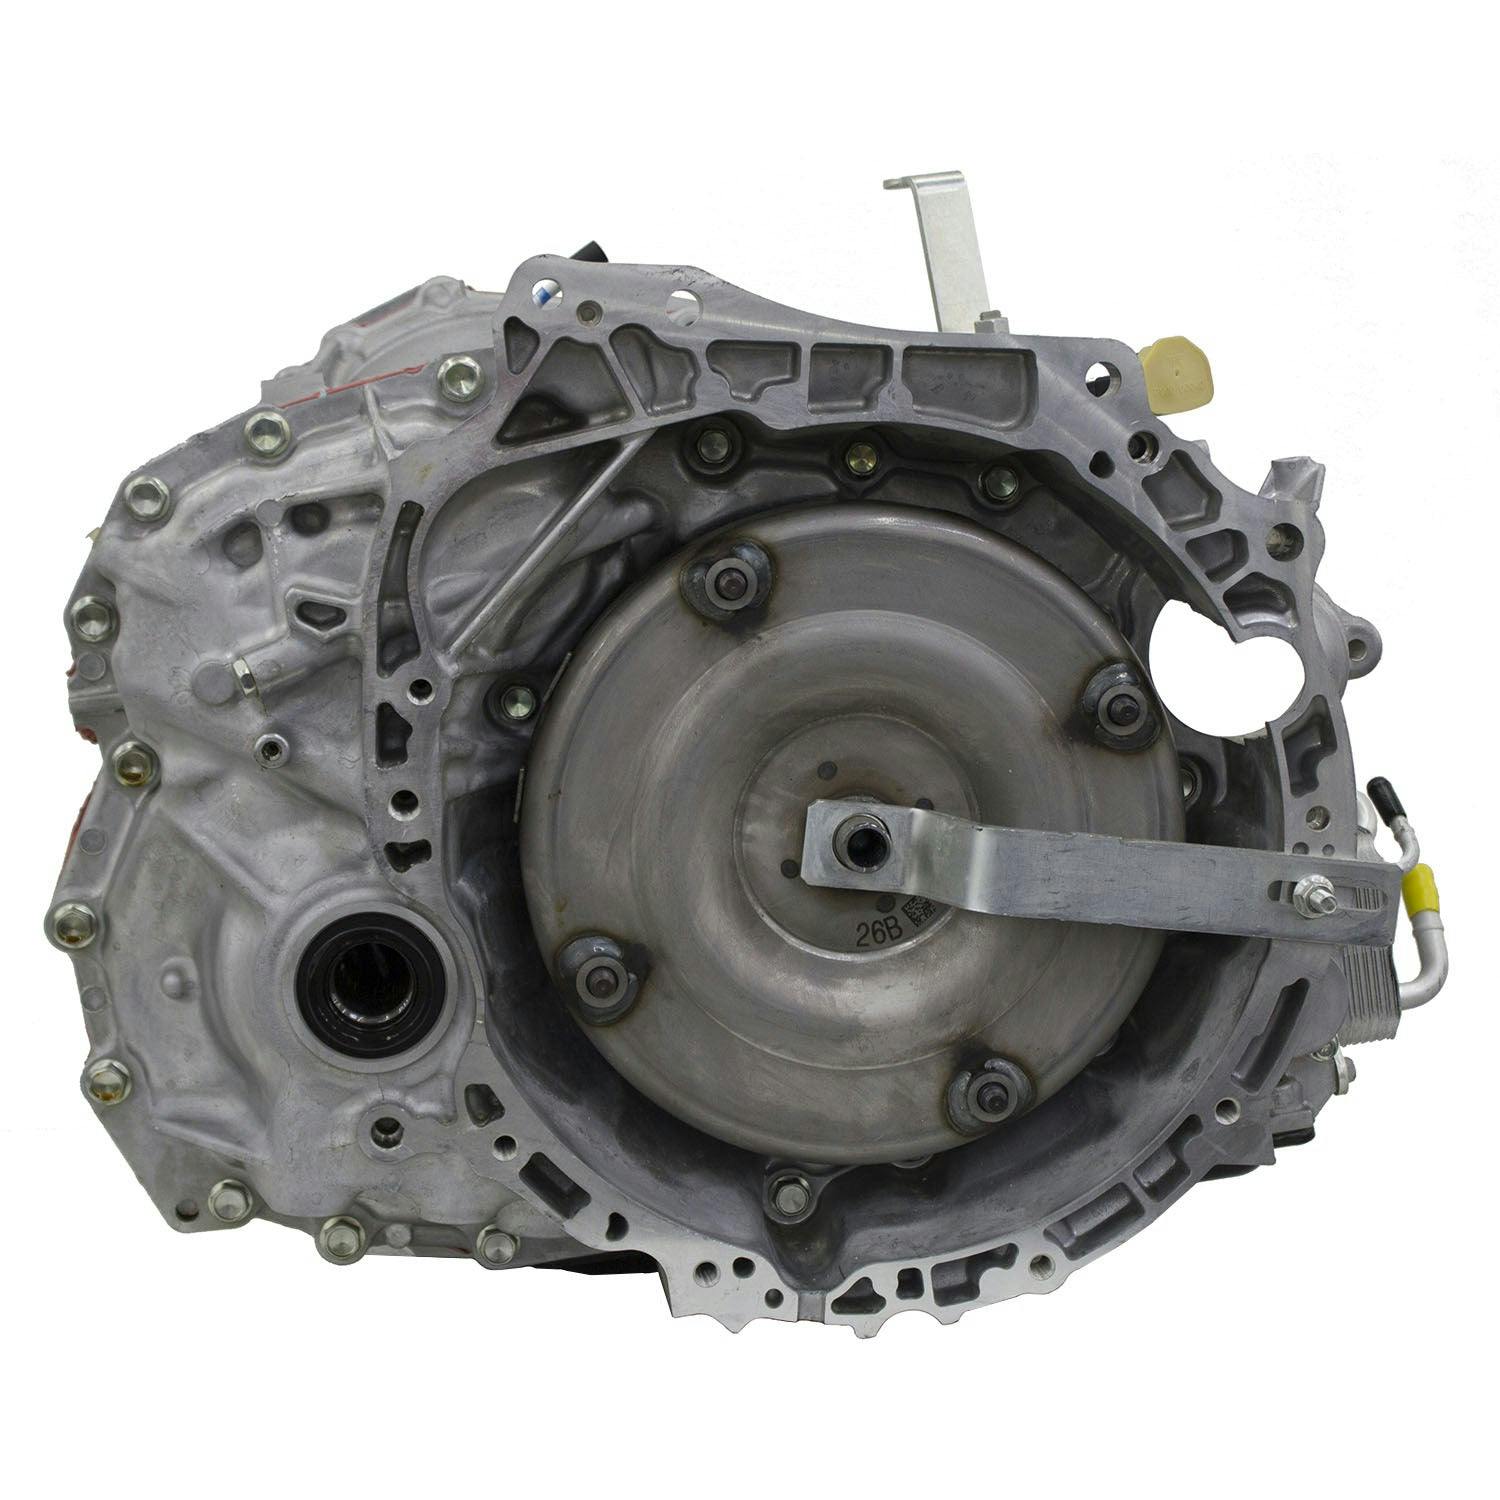 Automatic Transmission for 2011-2014 Nissan Juke FWD with 1.6L Inline-4 Engine